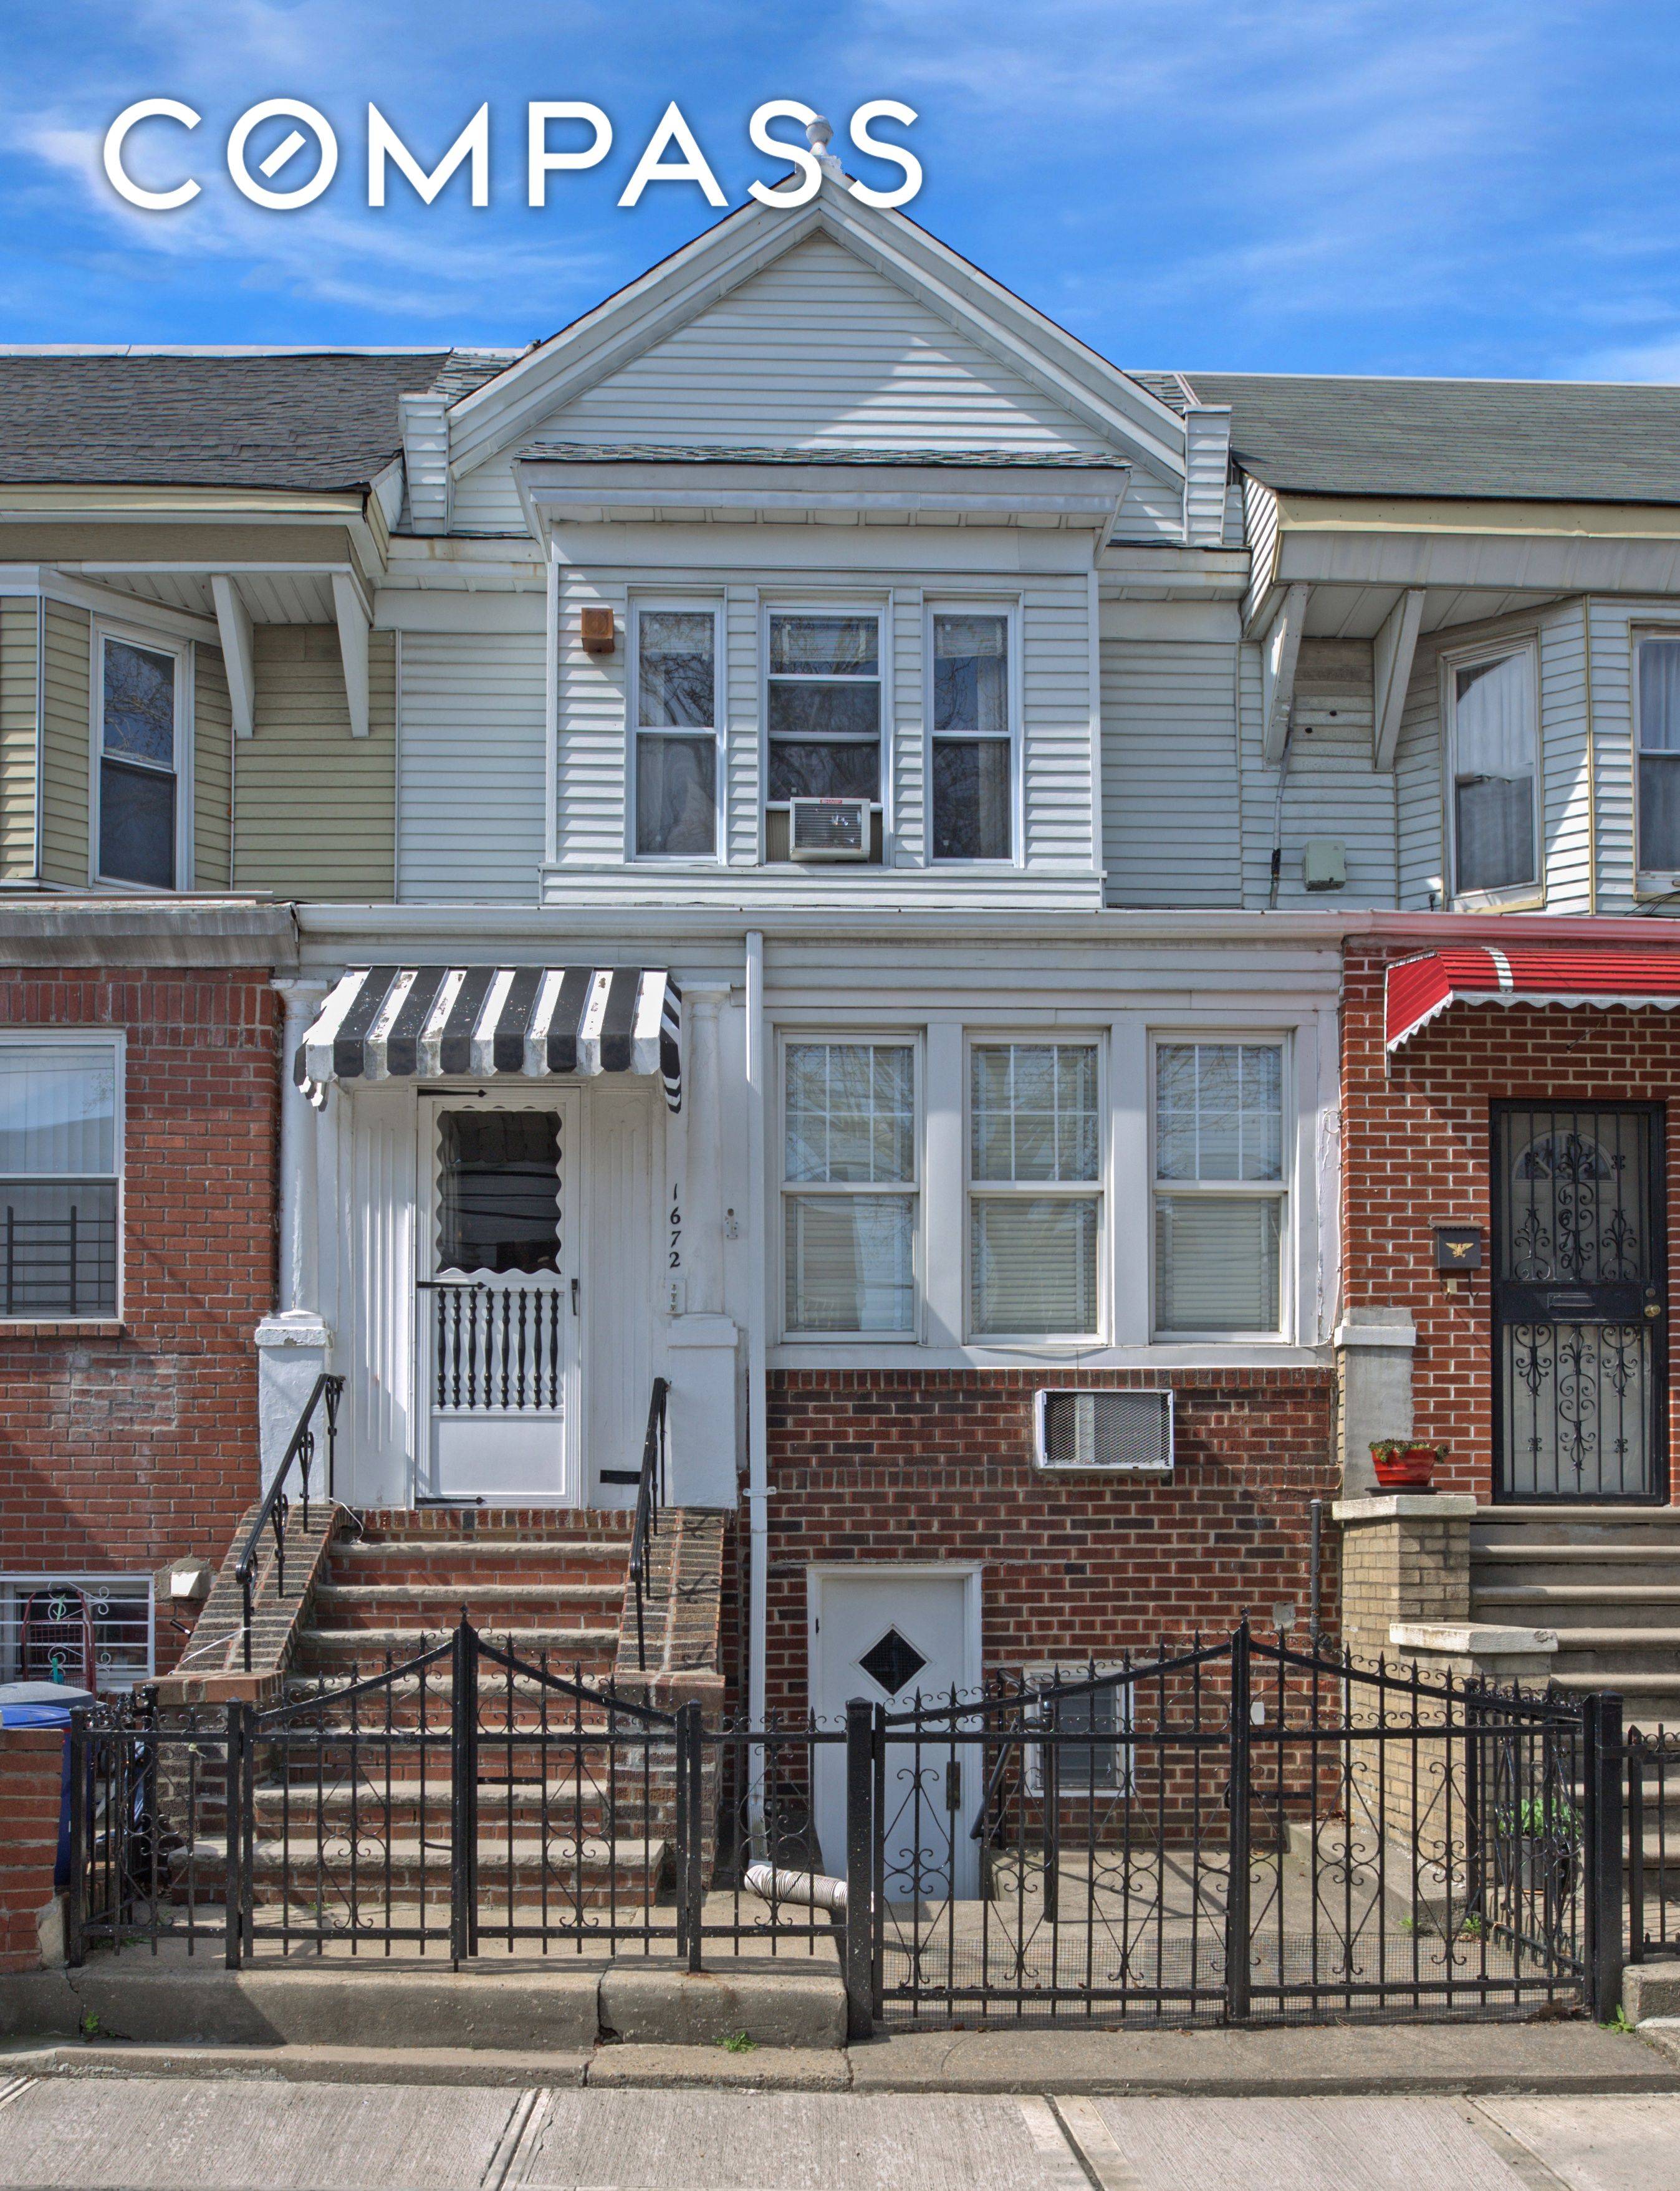 Welcome to this spacious two family home a block away from the park on the border between Bensonhurst and Bath Beach.